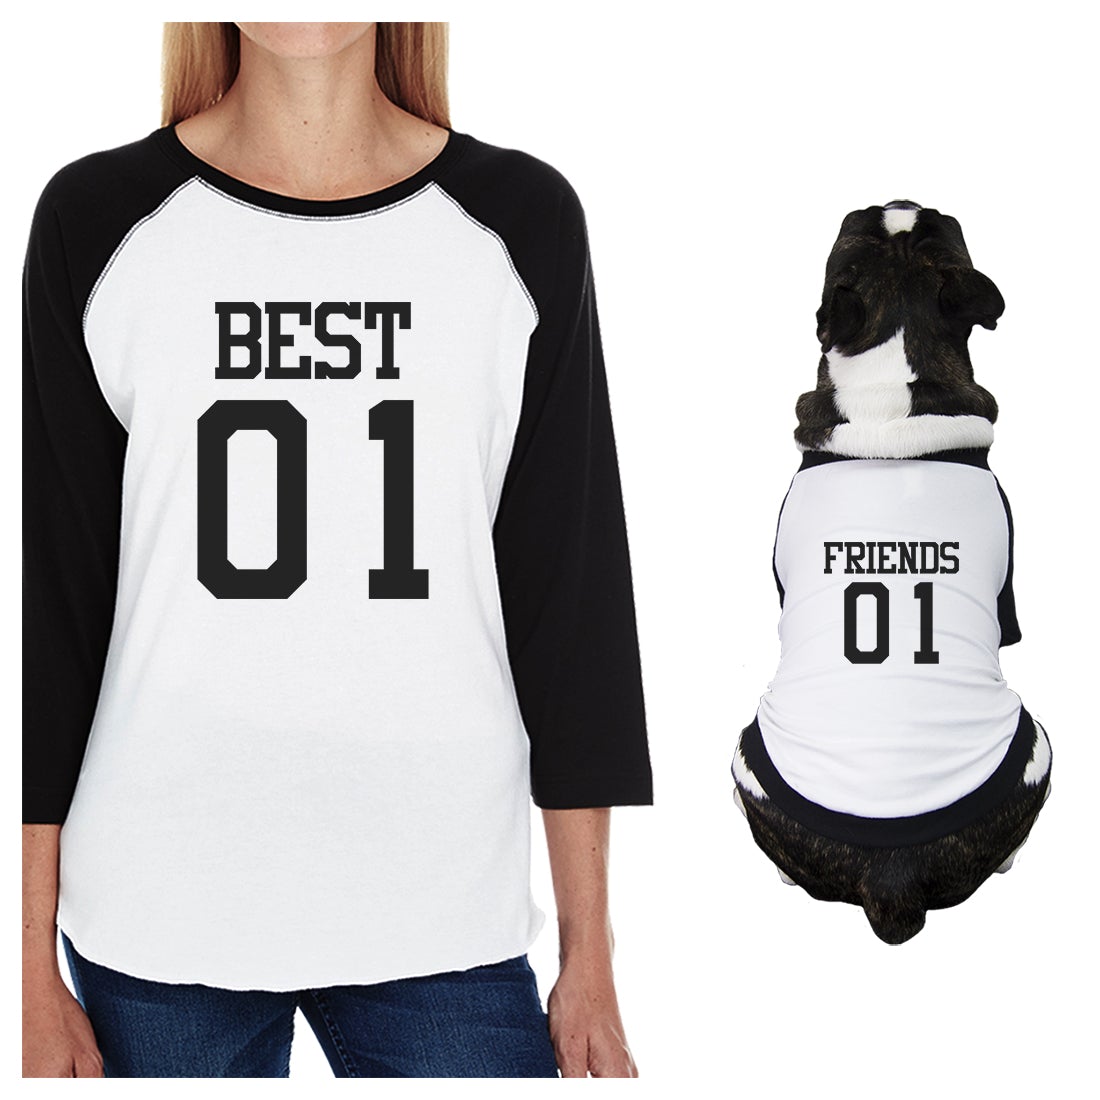 Best01 Friends02 Small Dog and Mom Matching Outfits Raglan Tees Black and White